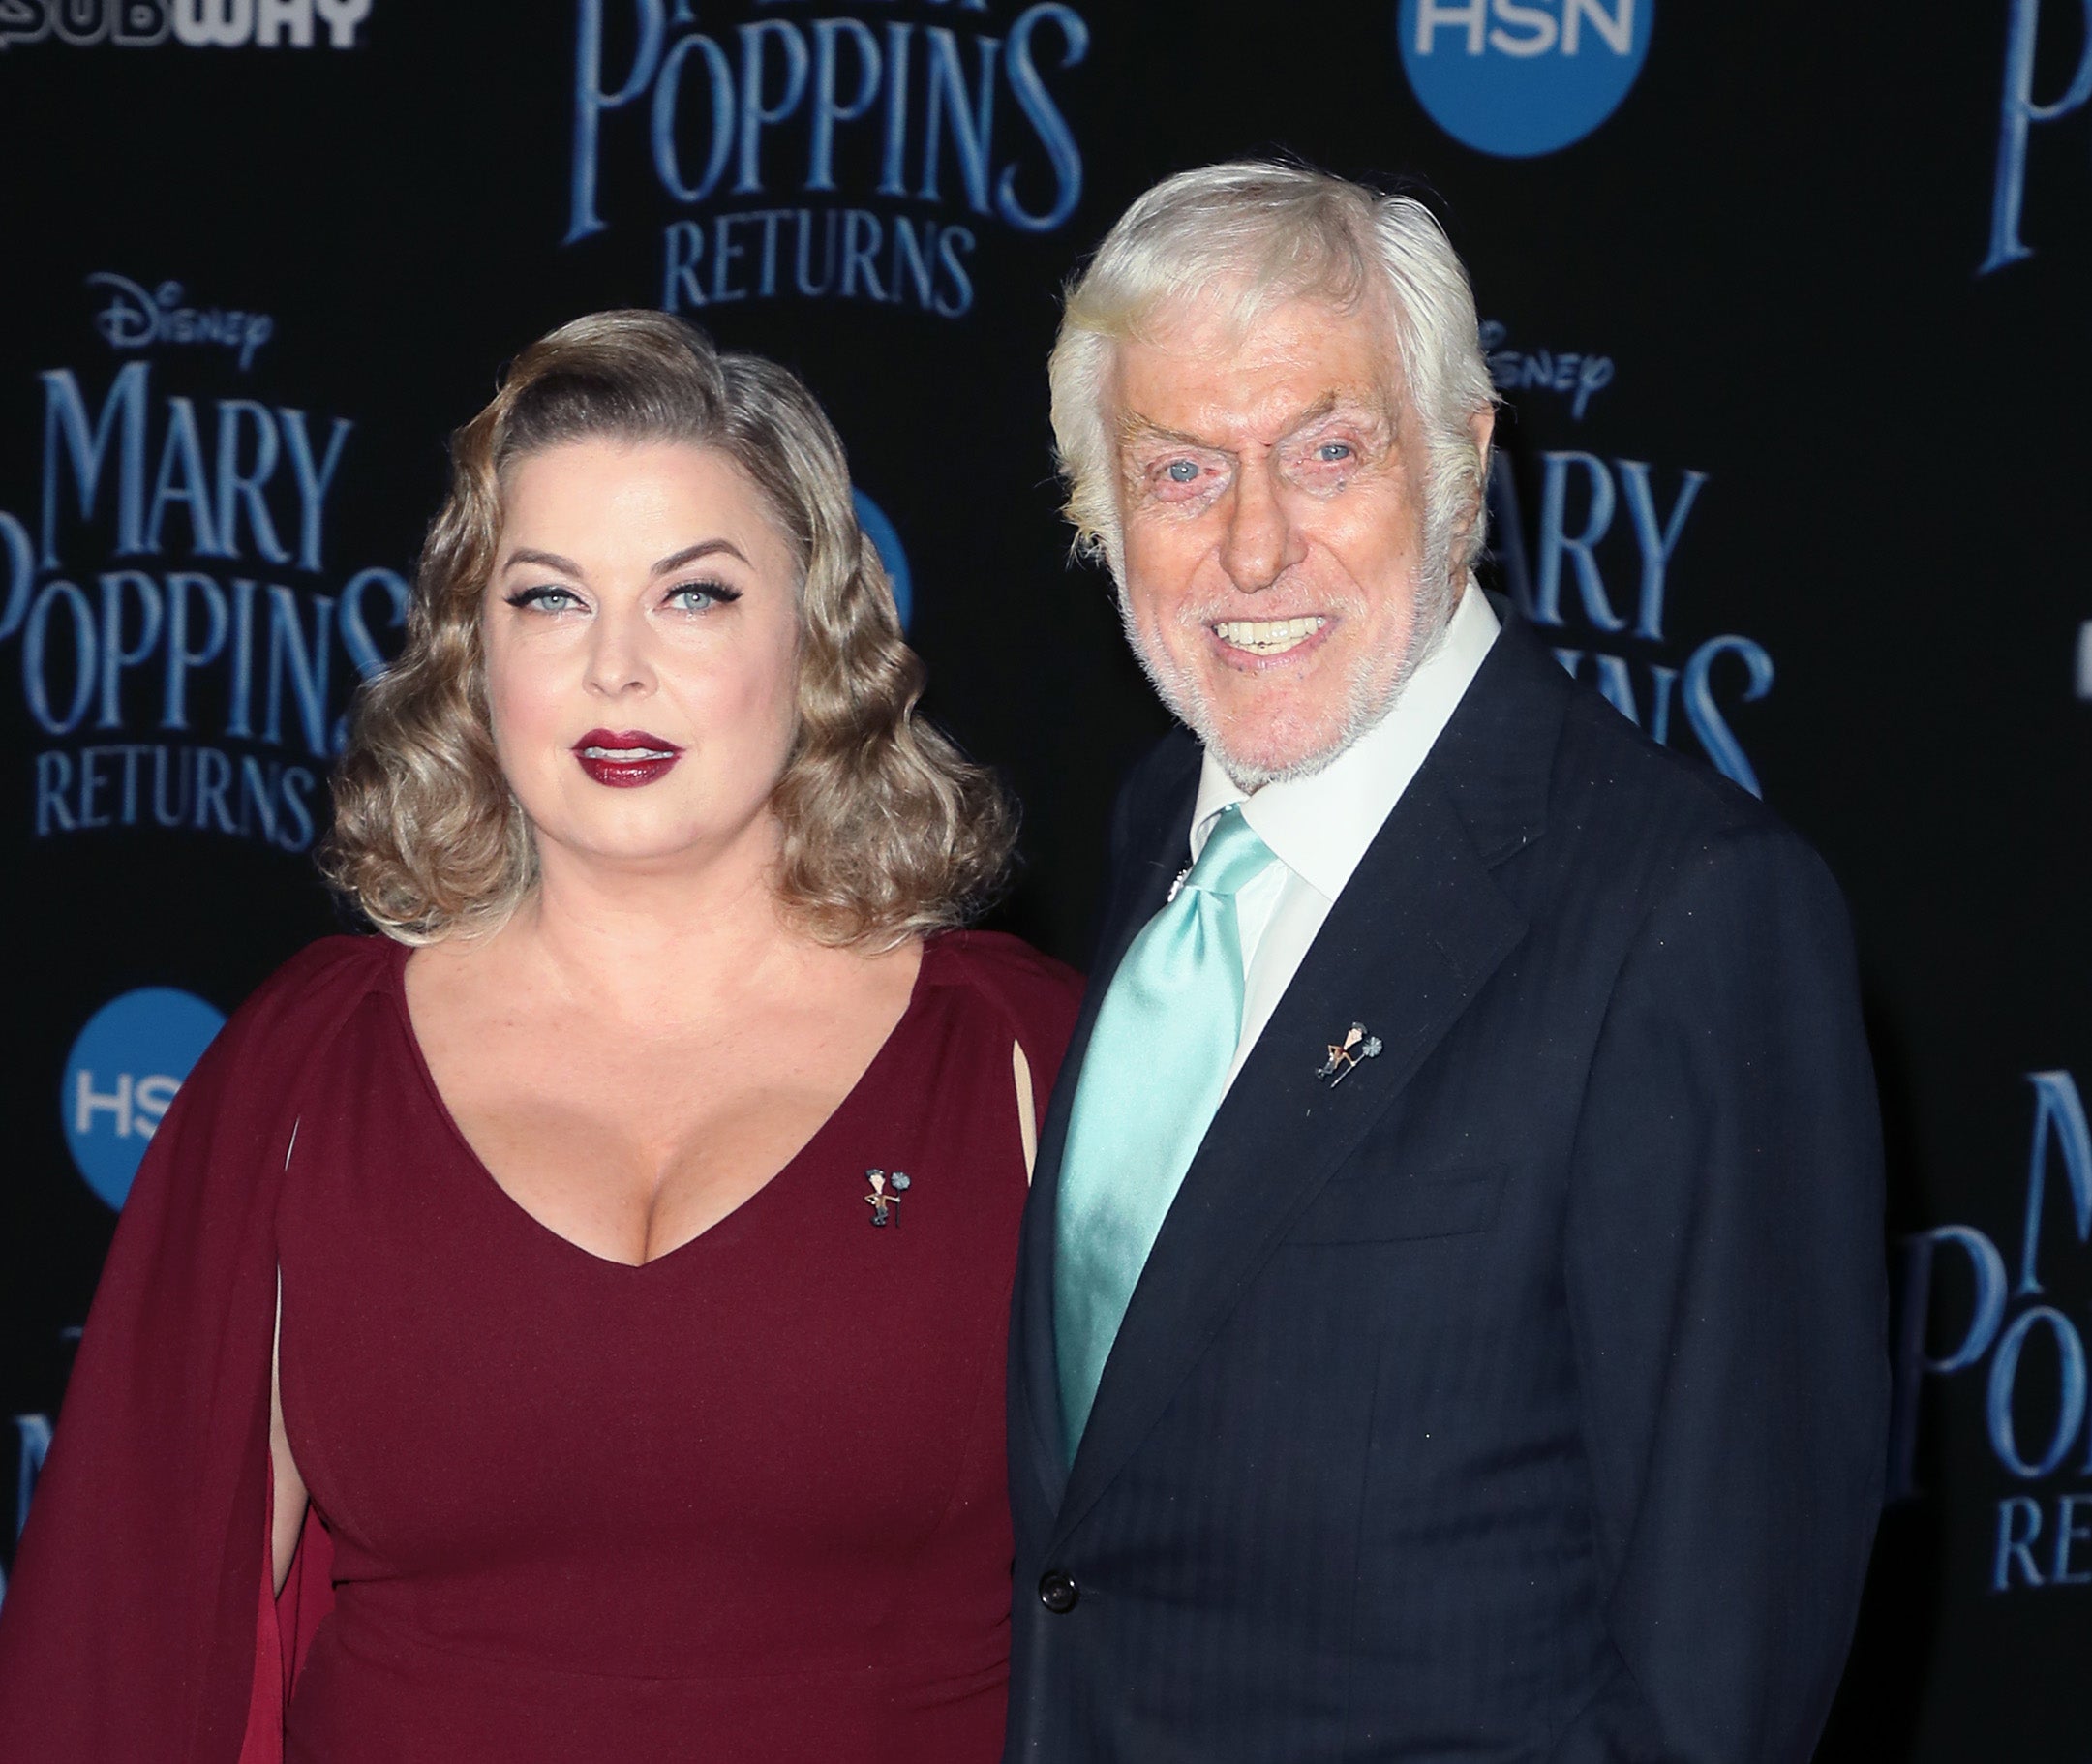 Dick Van Dyke and wife Arlene Silver at the premiere of Disney’s Mary Poppins Returns in November 2018